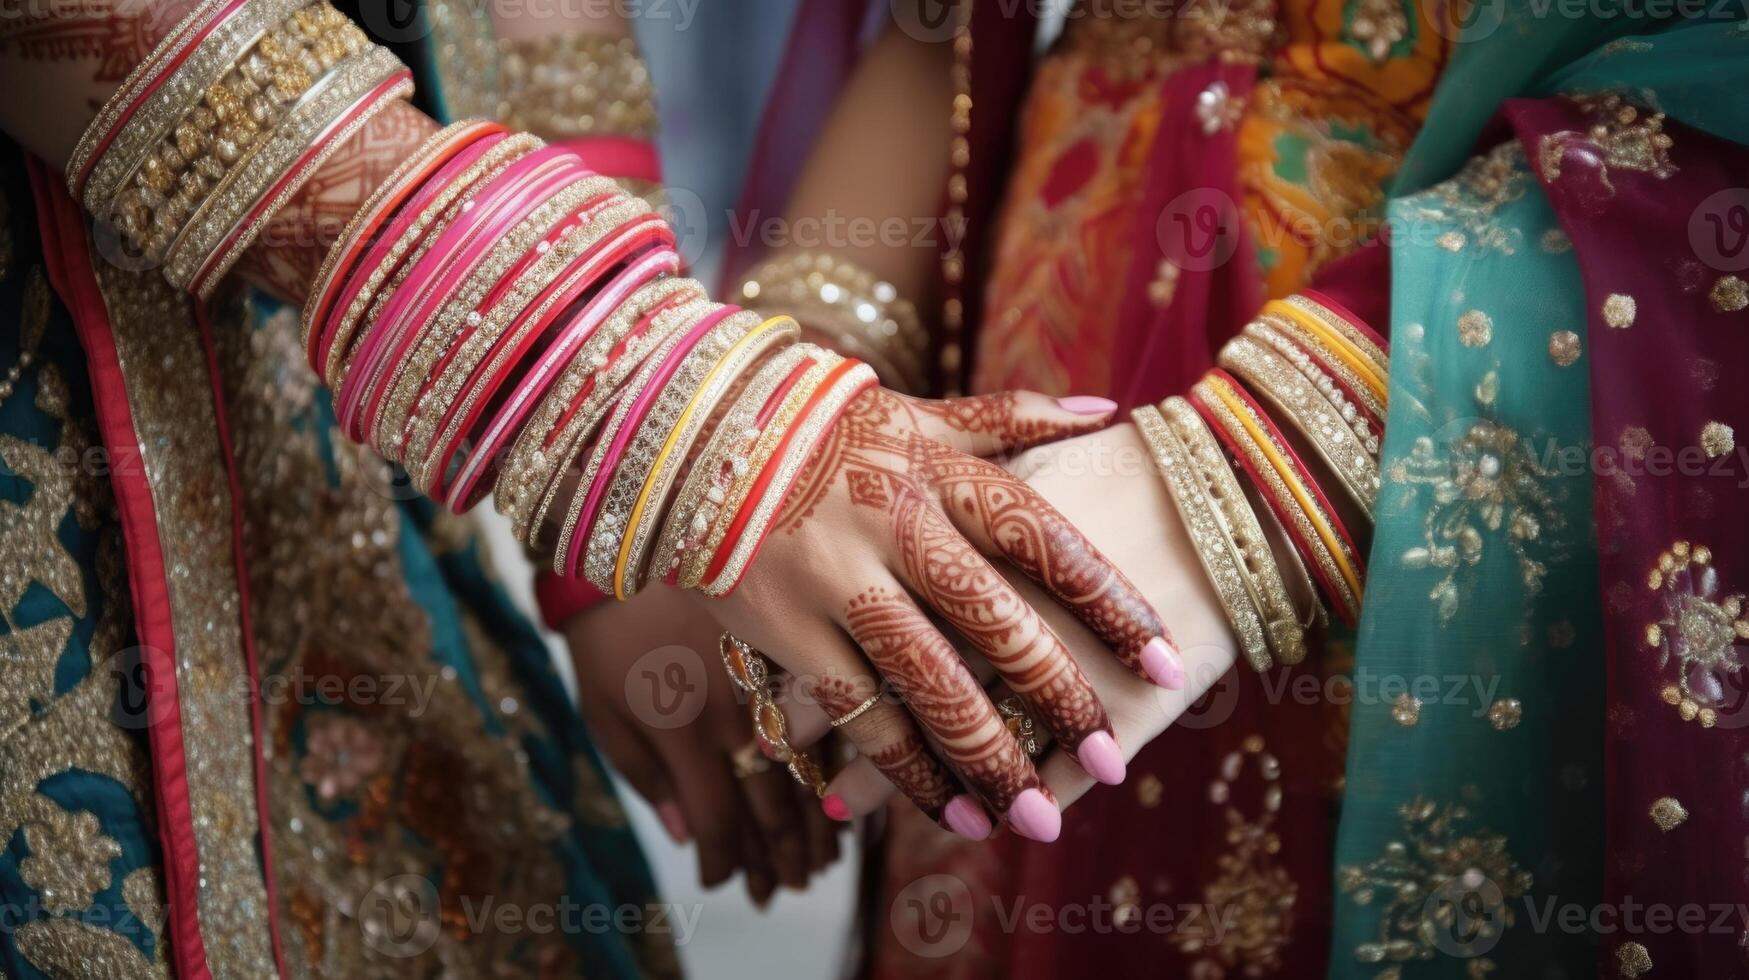 Cropped Image of Friendly or Casual Handshake Between Indian Women in their Traditional Attire. photo